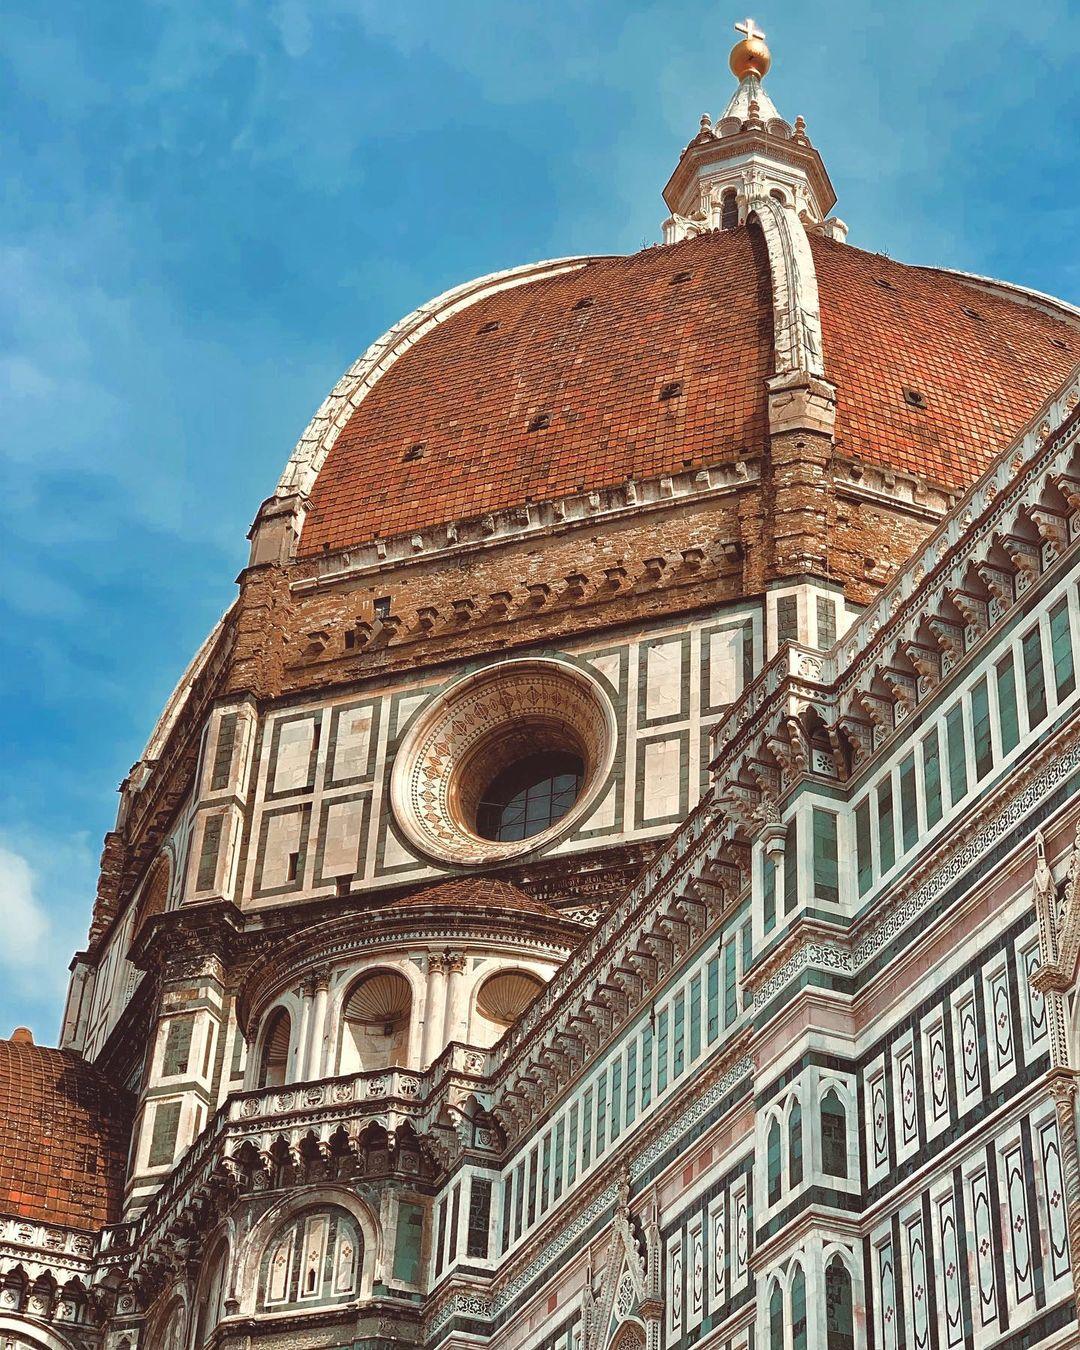 New routes for the fall✈️💙

For a fall city break to remember, Florence is one of our favorite destinations. With resumed routes to the city in the heart of Tuscany, as well as to Amsterdam, Dublin, Krakow and Prague, we will now be flying more than 160 direct routes to 90 destinations during the fall.

See all our destinations on flysas.com

Welcome onboard!

#flysas #wearetravelers #florence #firenze #italy #tuscany